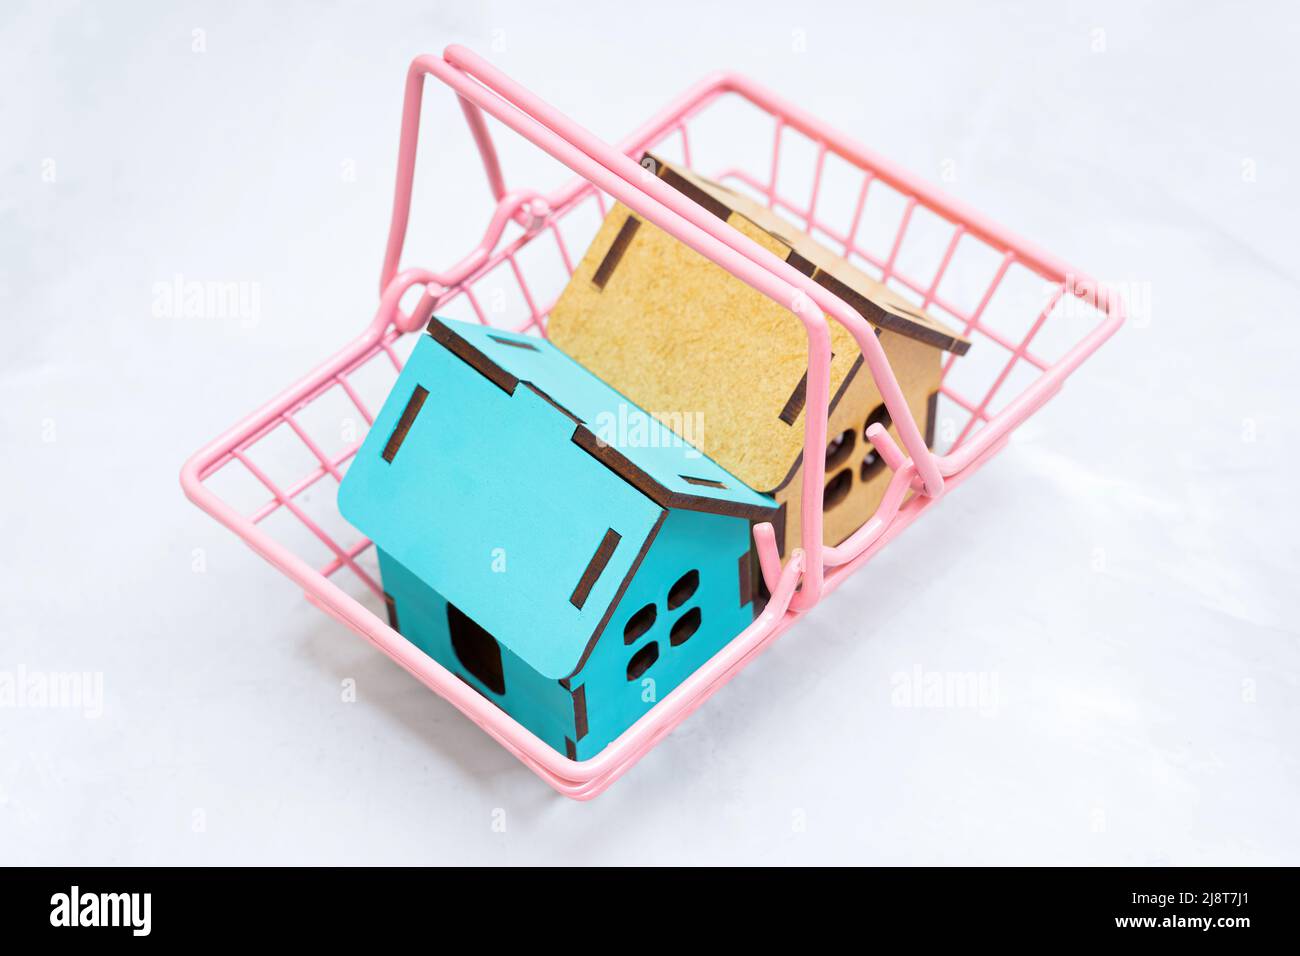 Top view of toy wooden houses in a pink shopping cart on a neutral background. Real estate sale concept. Stock Photo